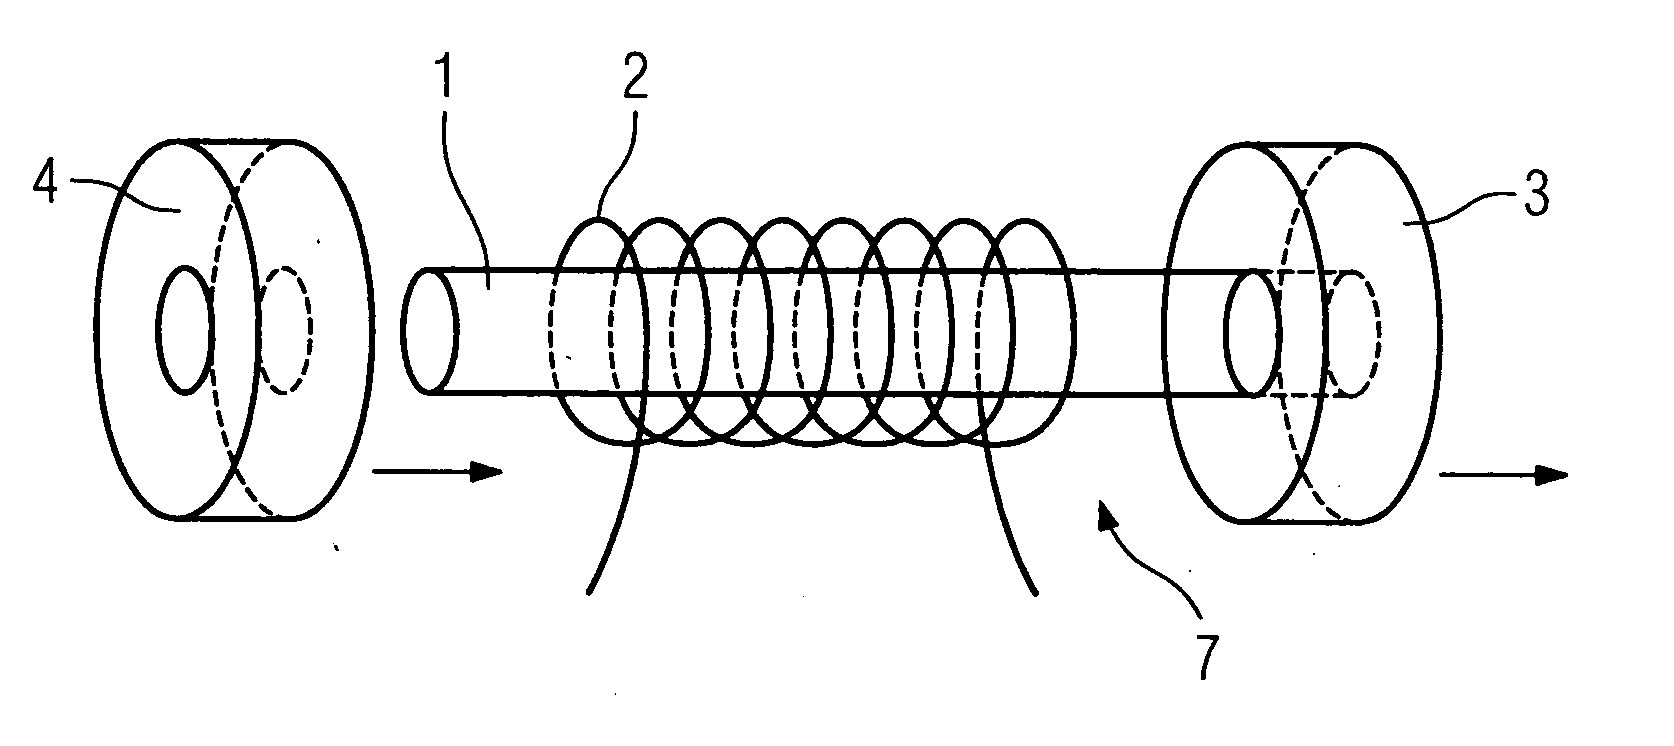 Induction coil for a hearing aid